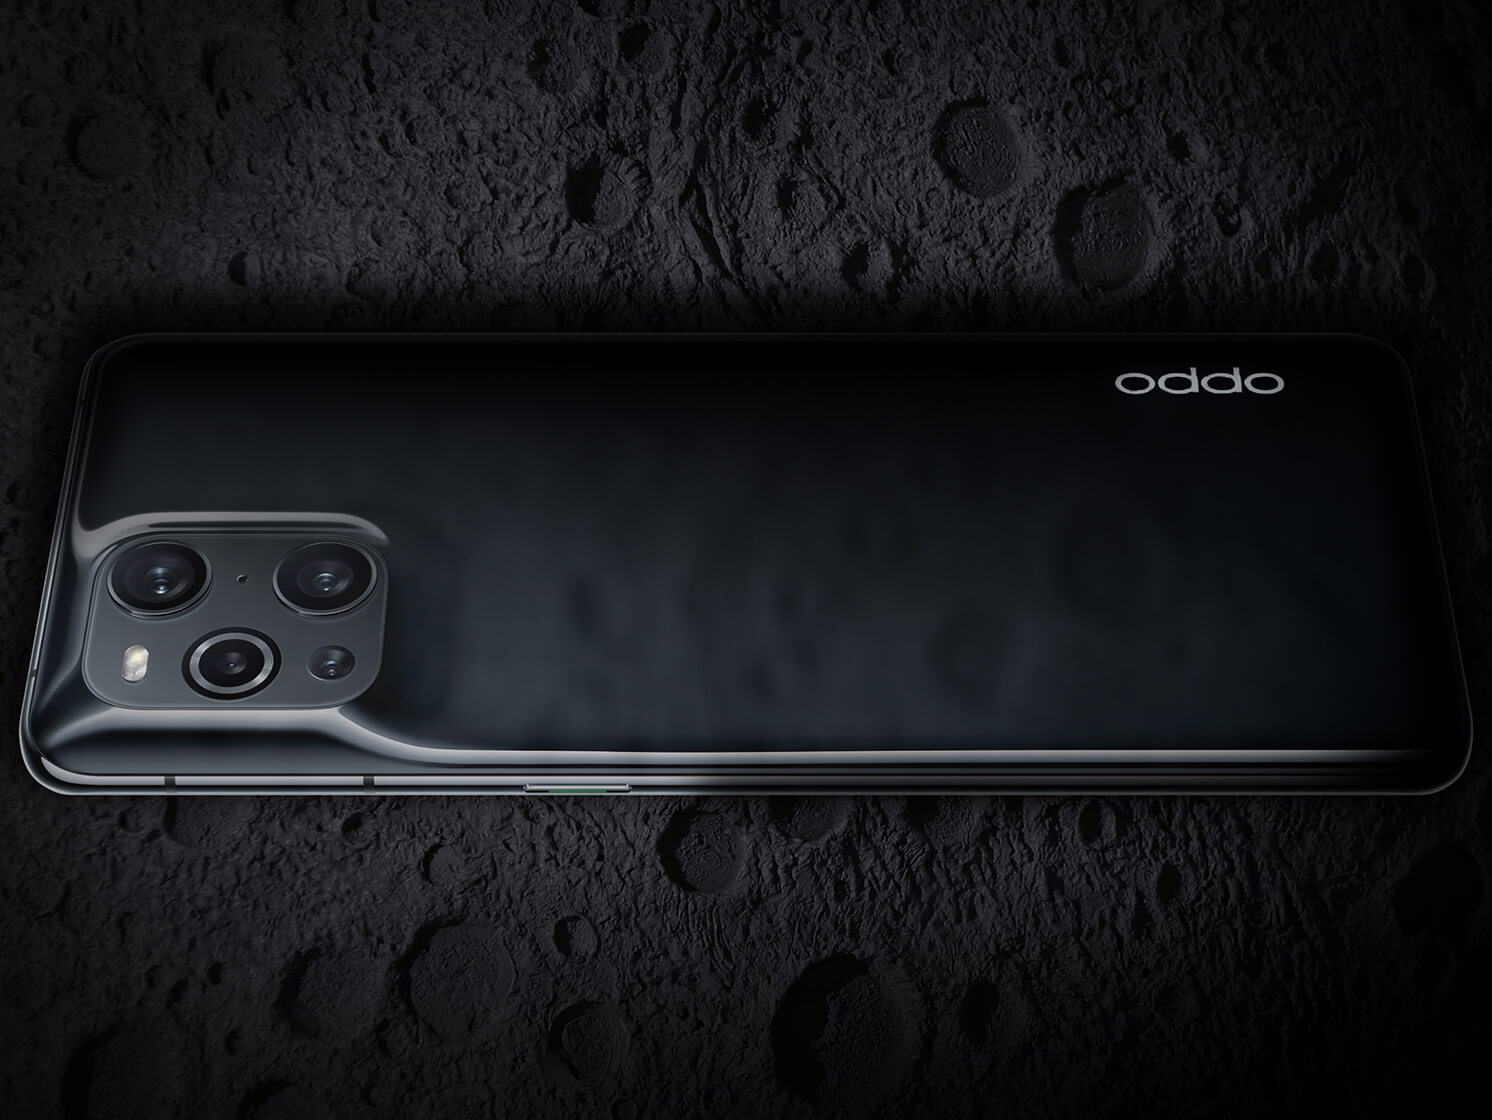 OPPO uses ceramics in its latest smartphone to allow warmth